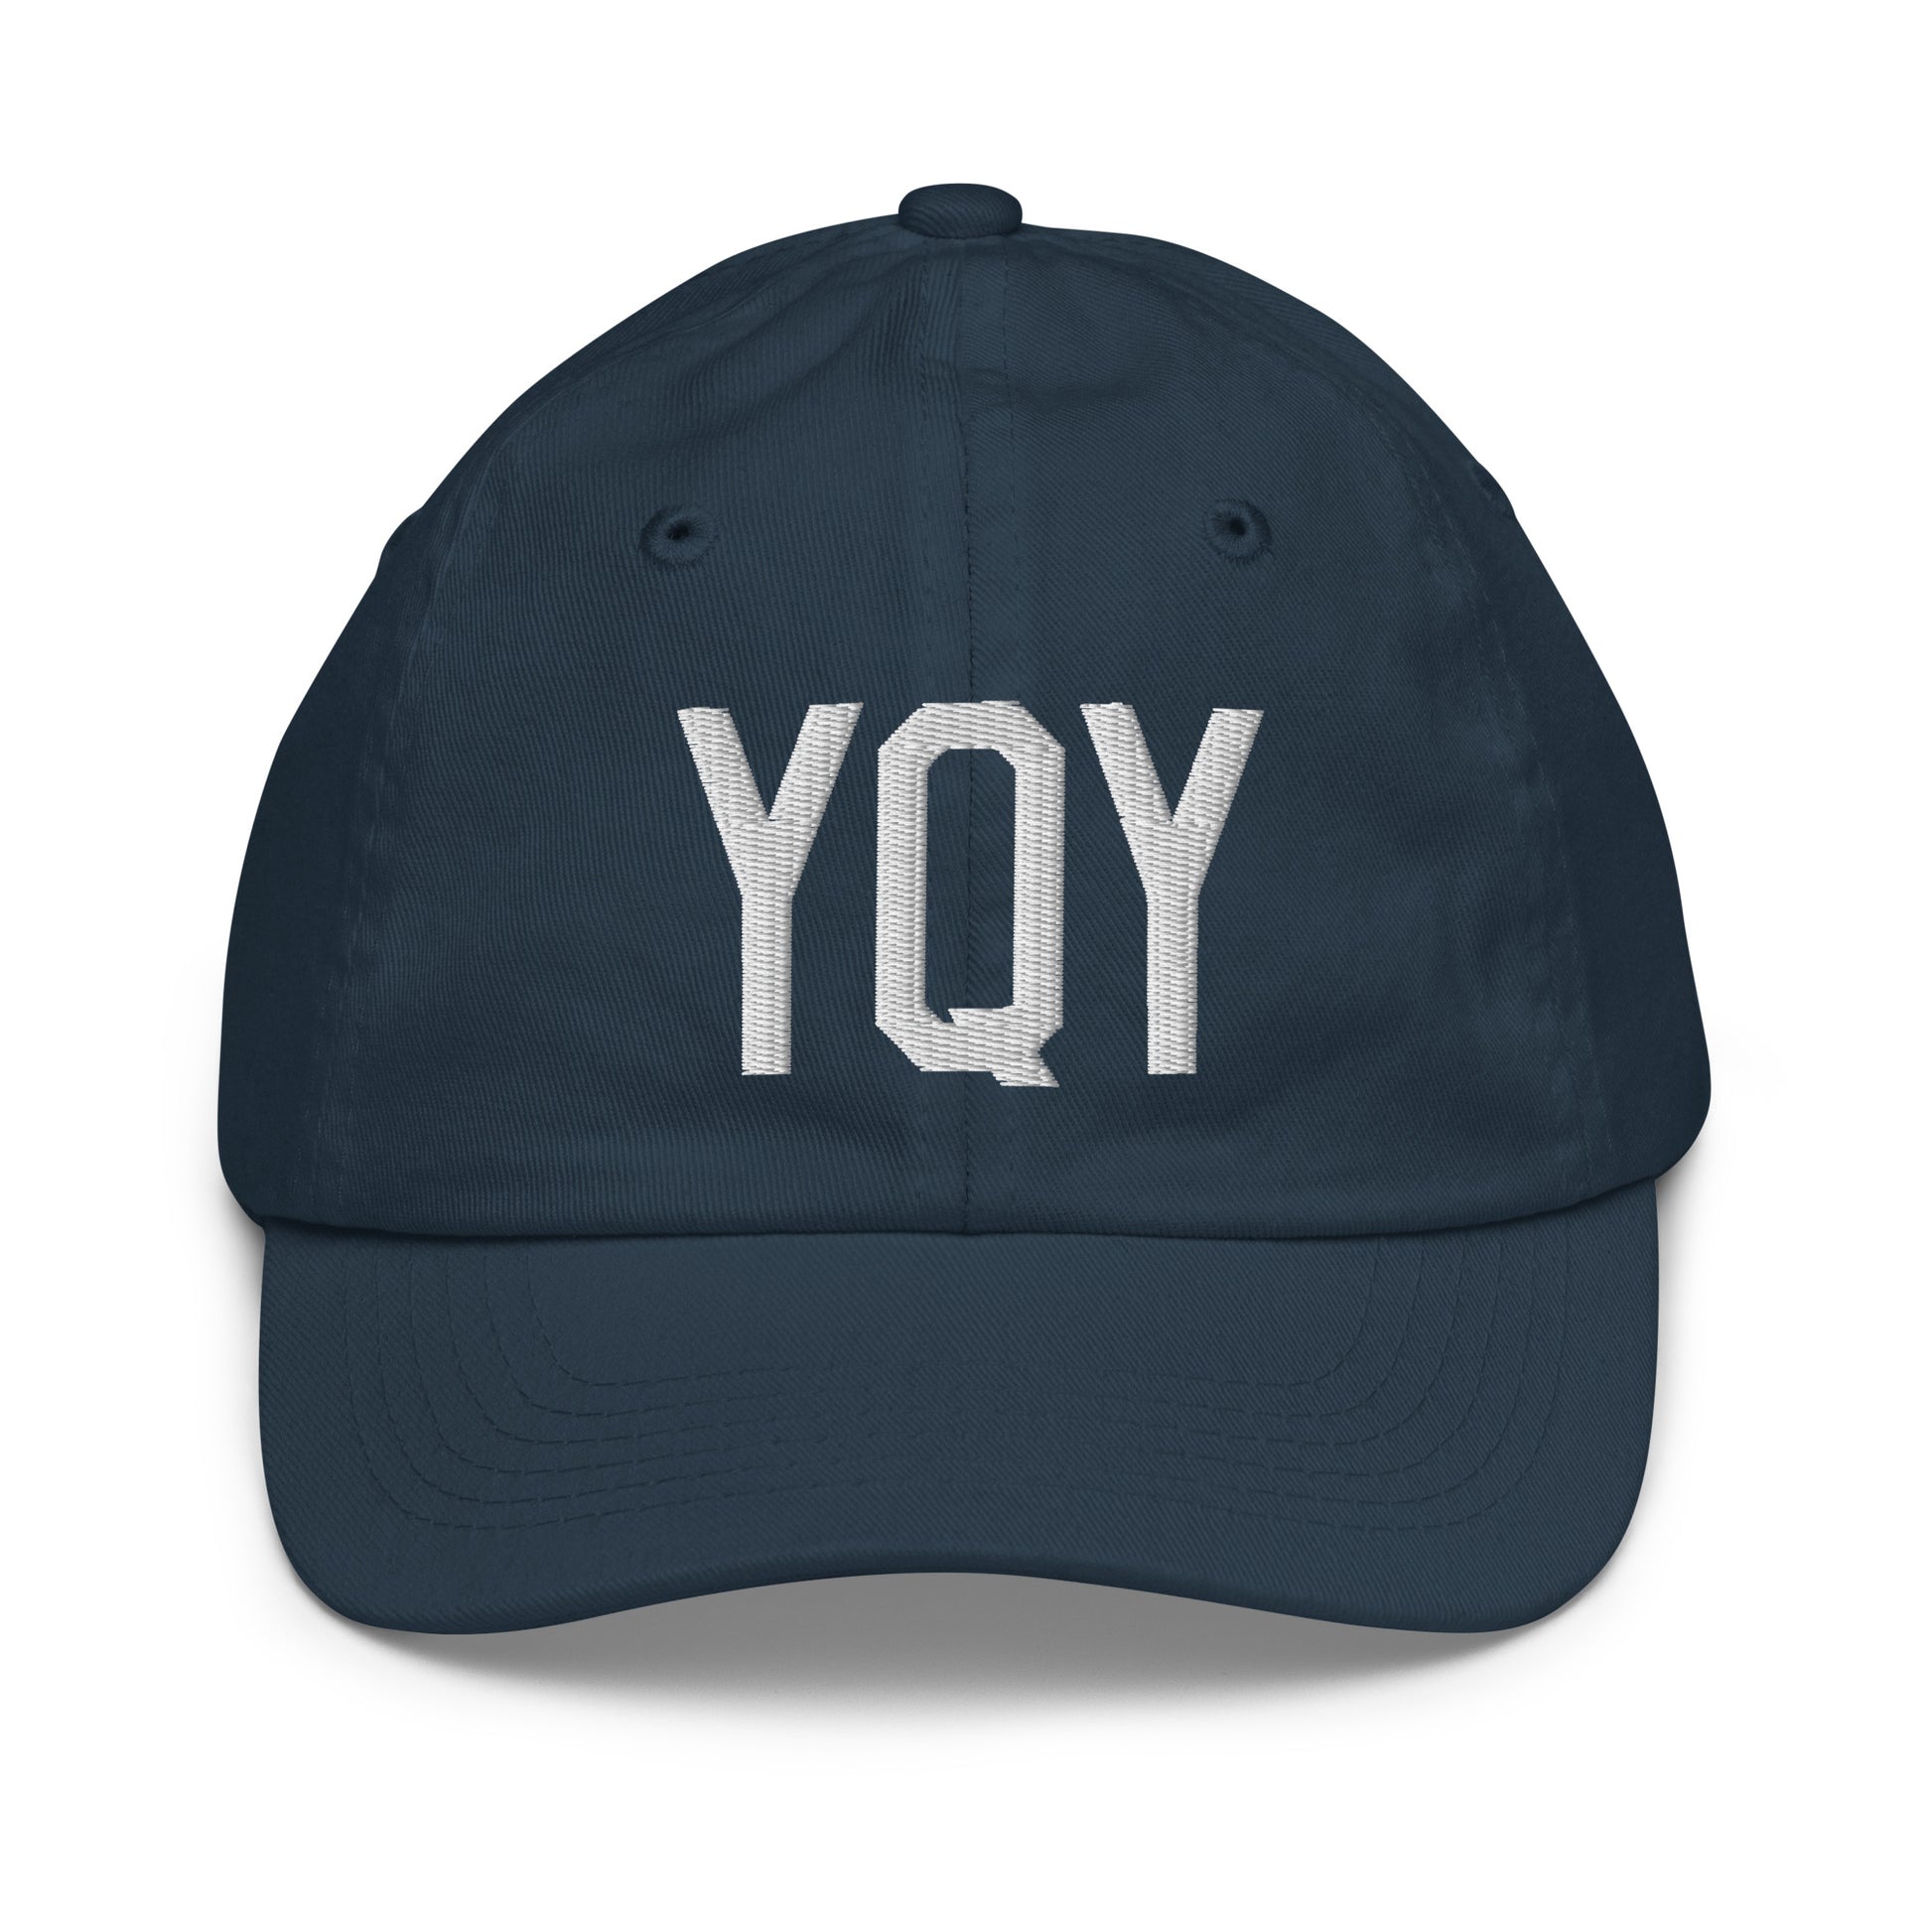 Airport Code Kid's Baseball Cap - White • YQY Sydney • YHM Designs - Image 14